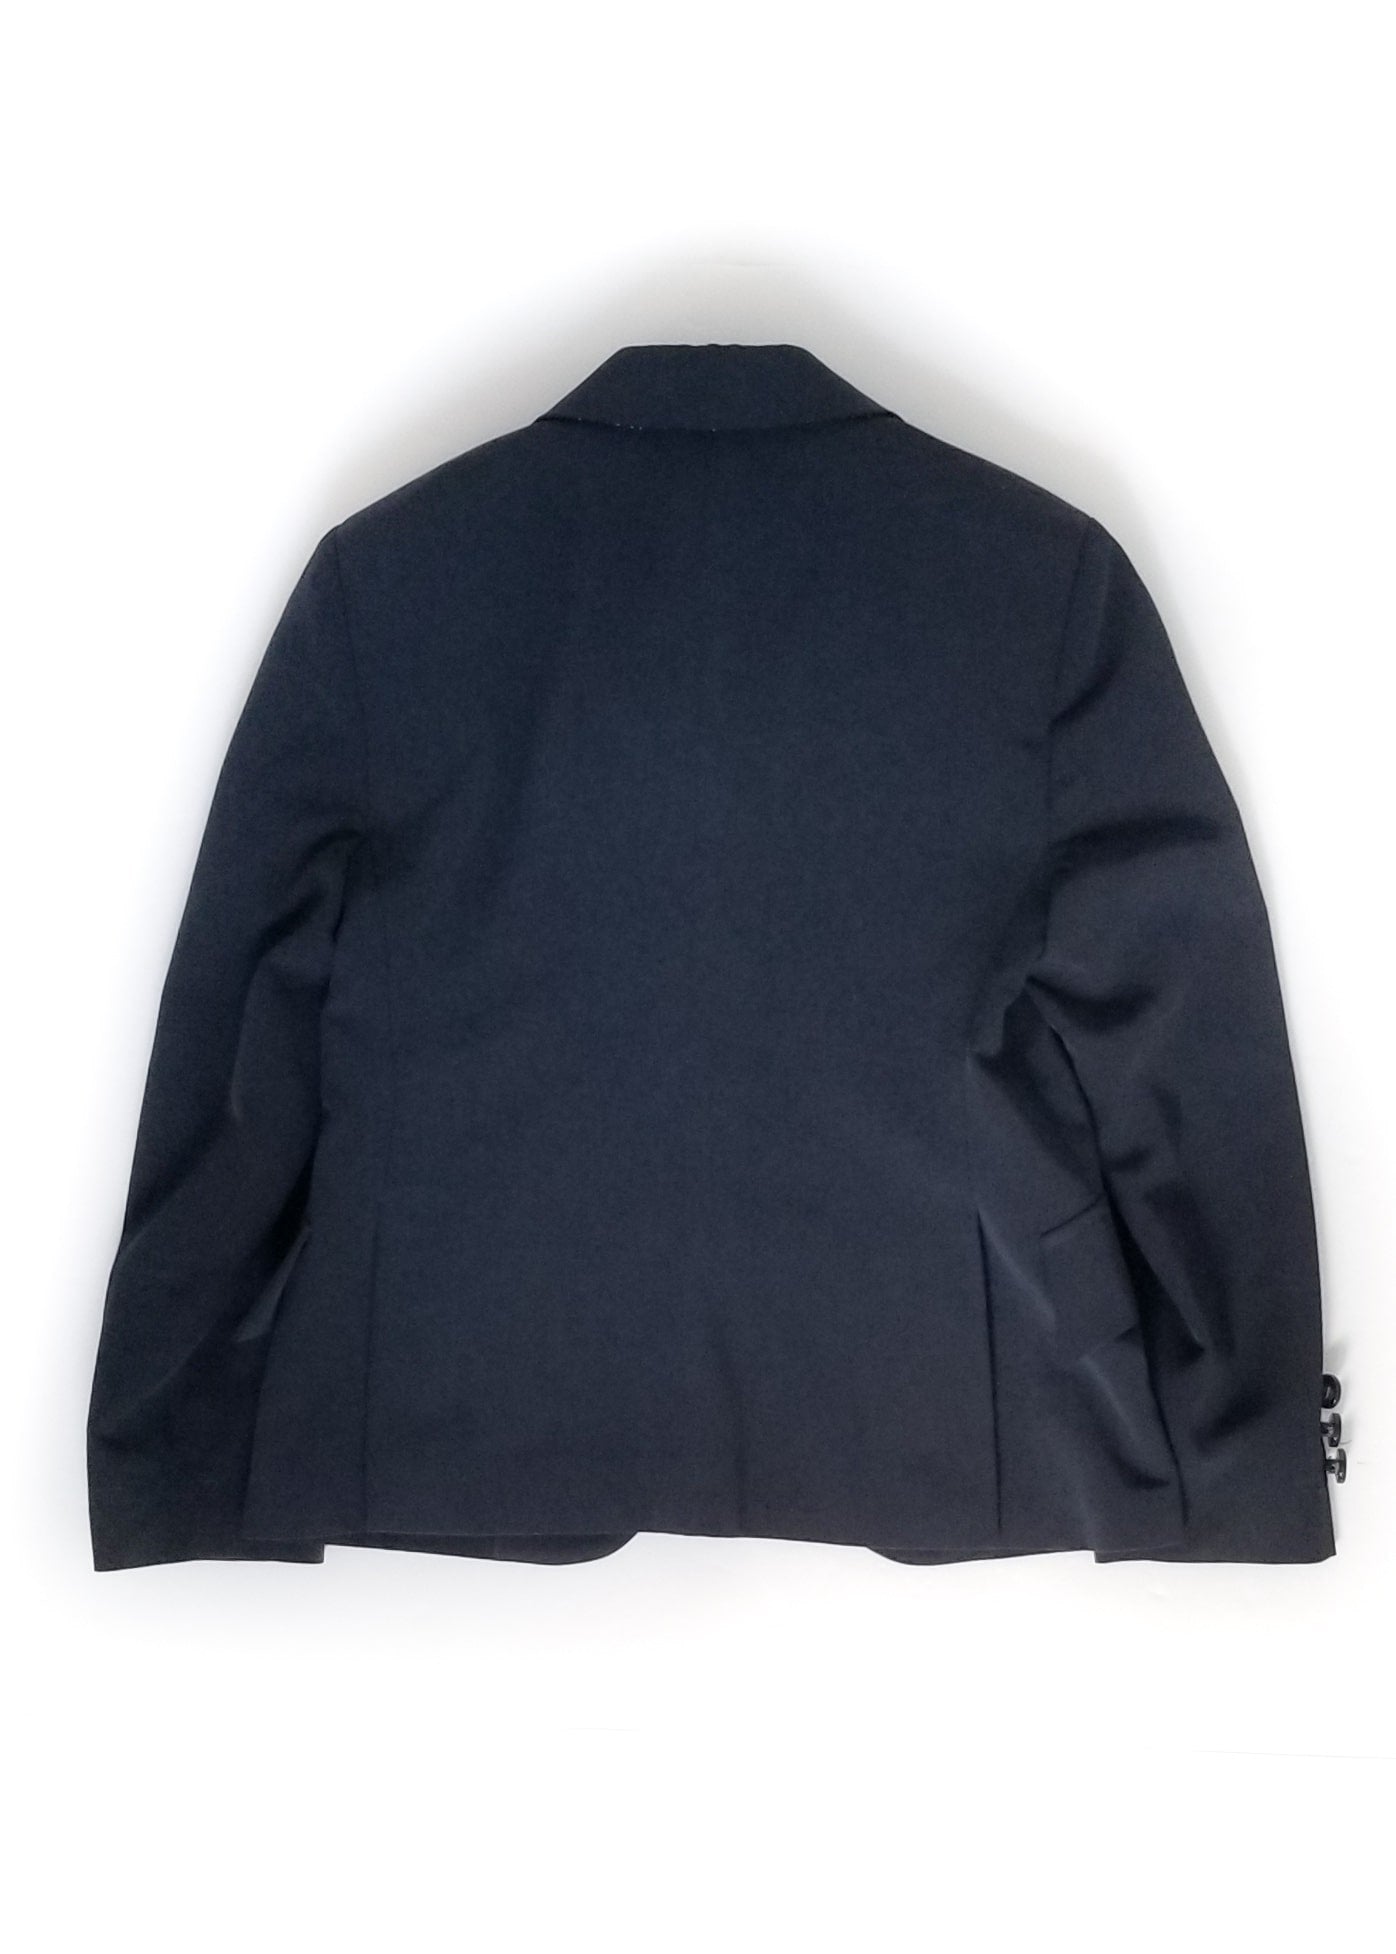 Grand Prix Apparel Show Jacket - Navy - Youth 6R